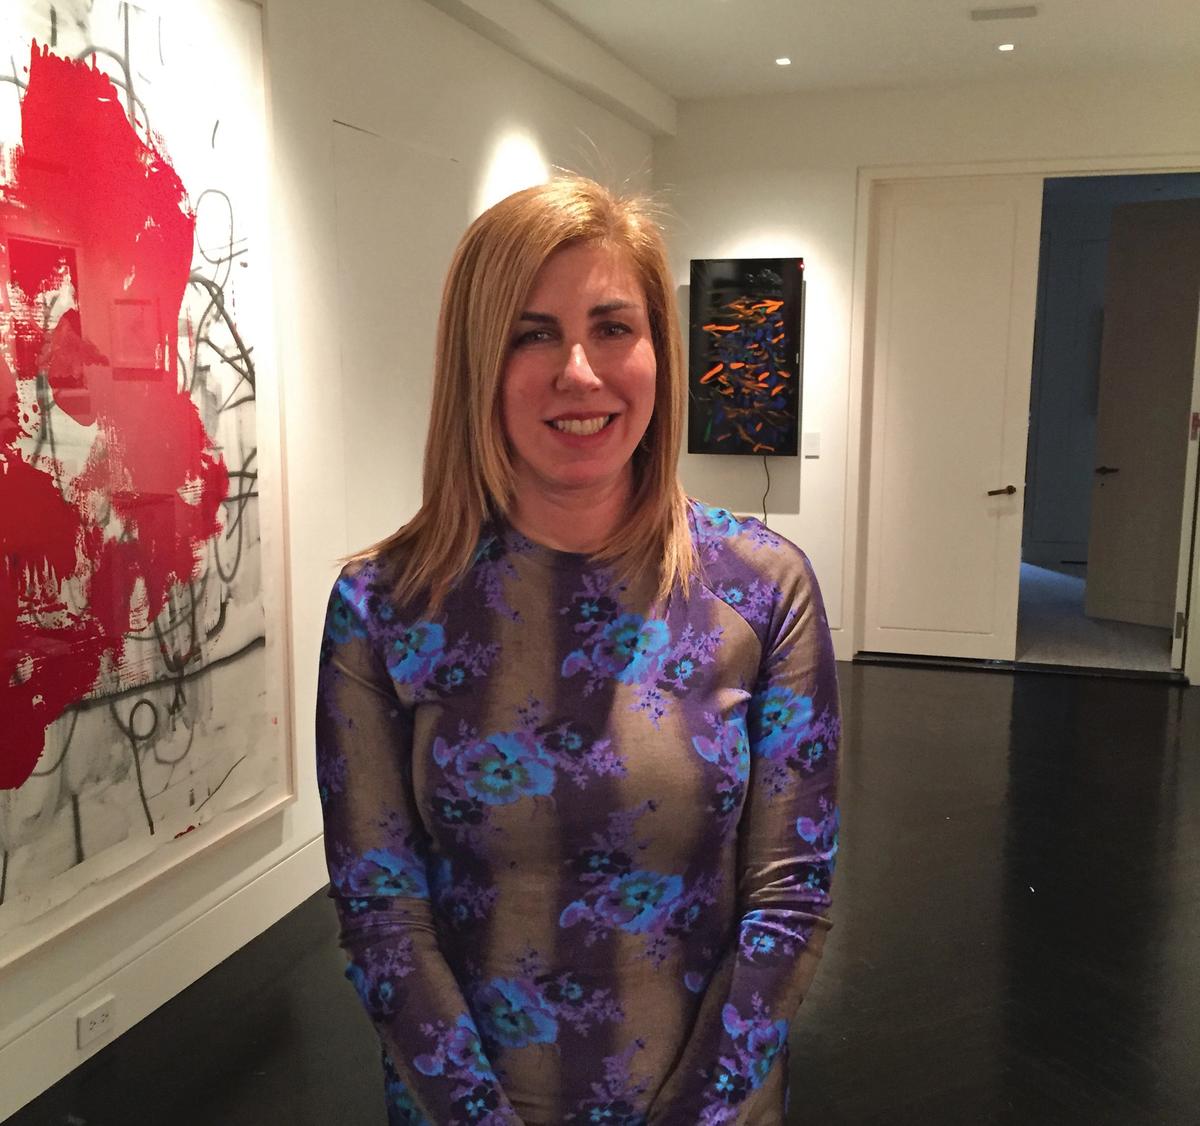 Collector Candace Carmel Barasch thinks of art as “the great philosopher” Courtesy of Candace Carmel Barasch